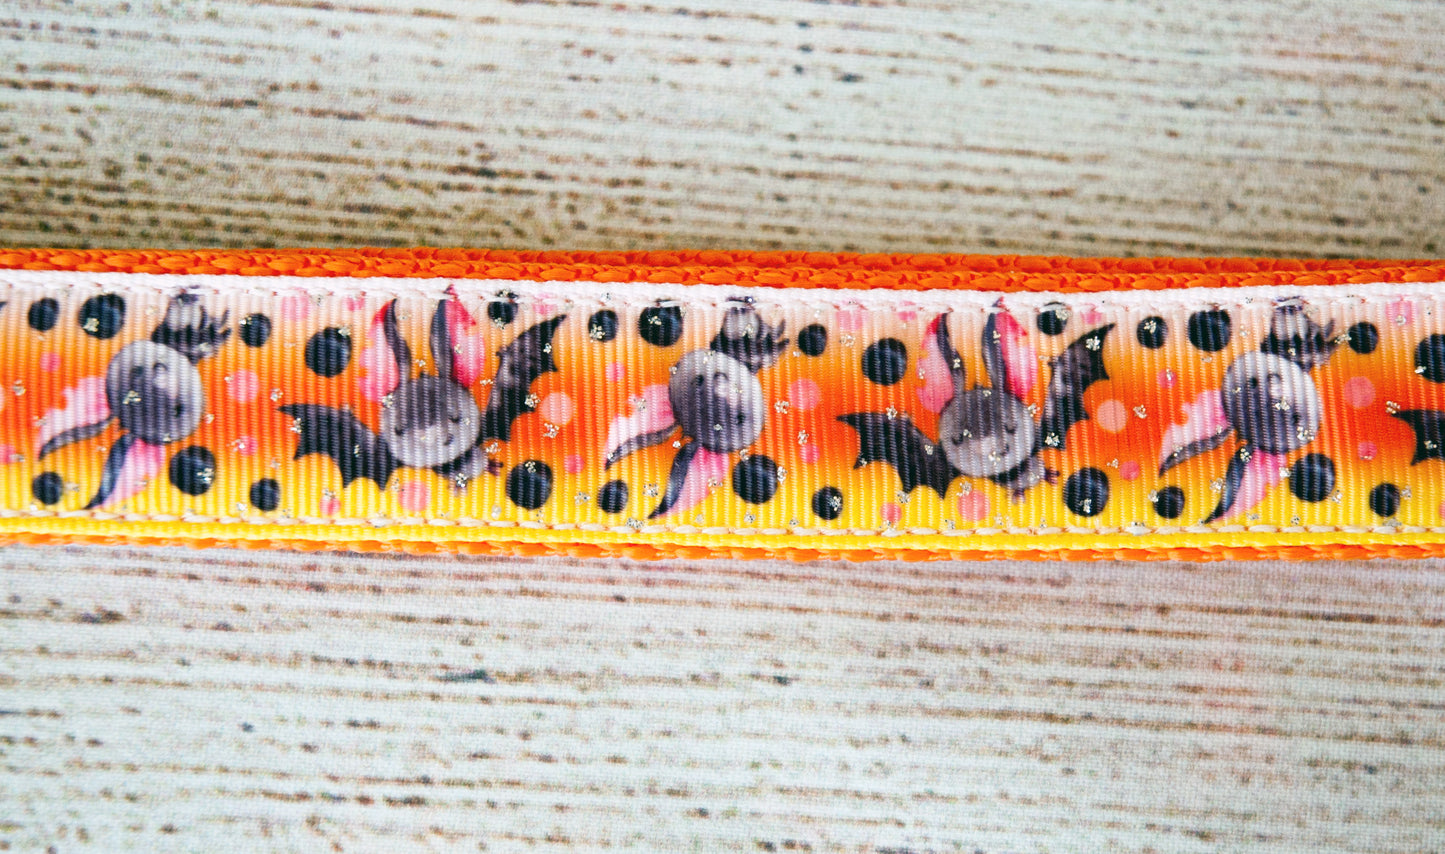 Cute little bat Halloween dog collar with a candy corn colored background. 1"wide